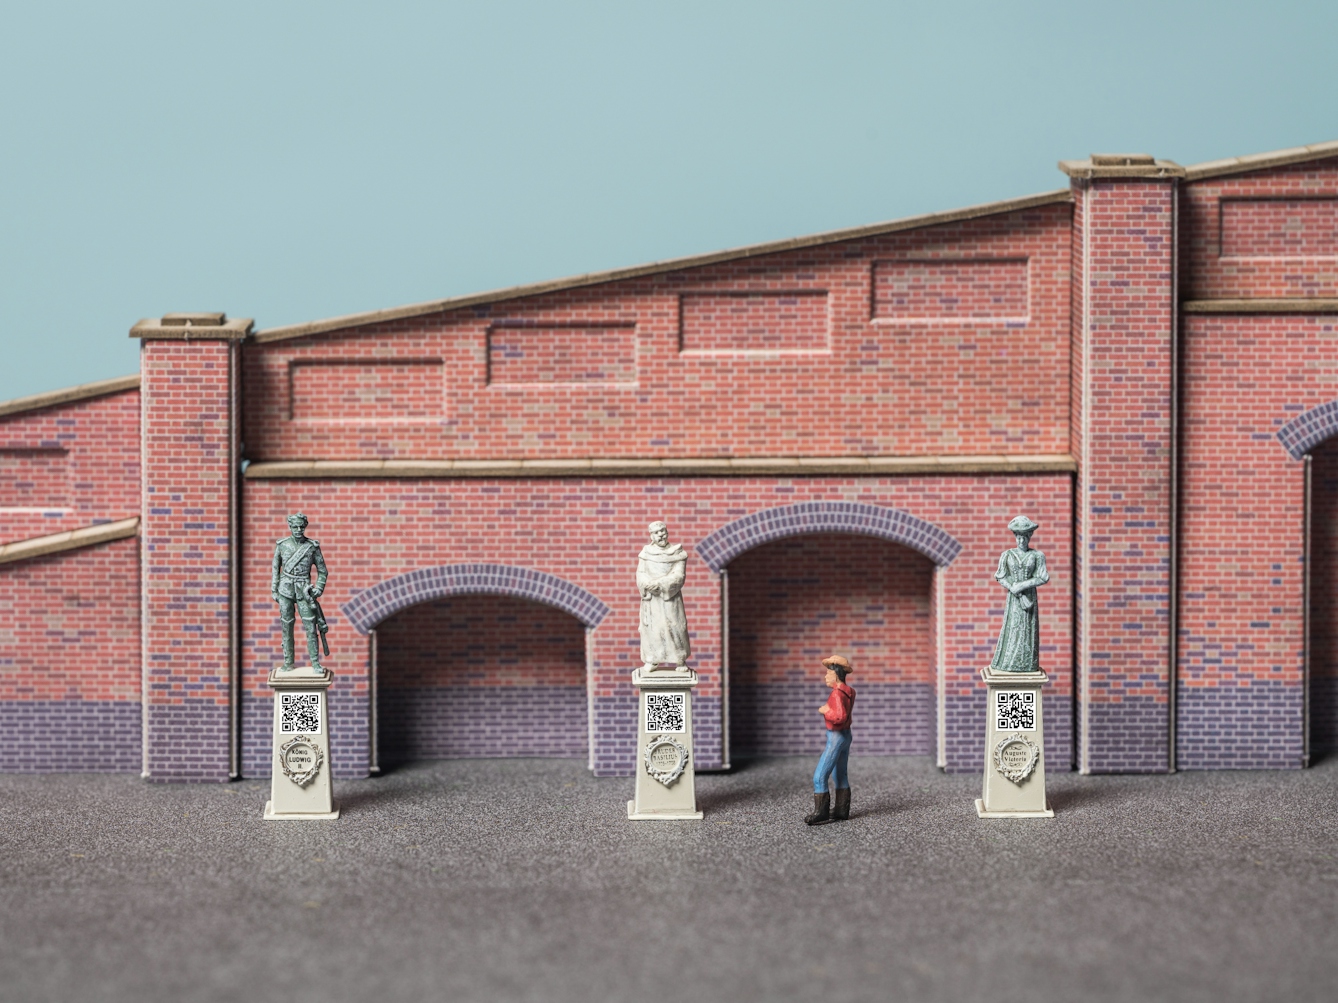 Photograph of model railway scenery depicting a tapered brick wall in front of which are three statues on plinths. Under each statue is a carved wreath with their name in the middle and a printed QR code. A model figure stands looking at the statue in the middle.